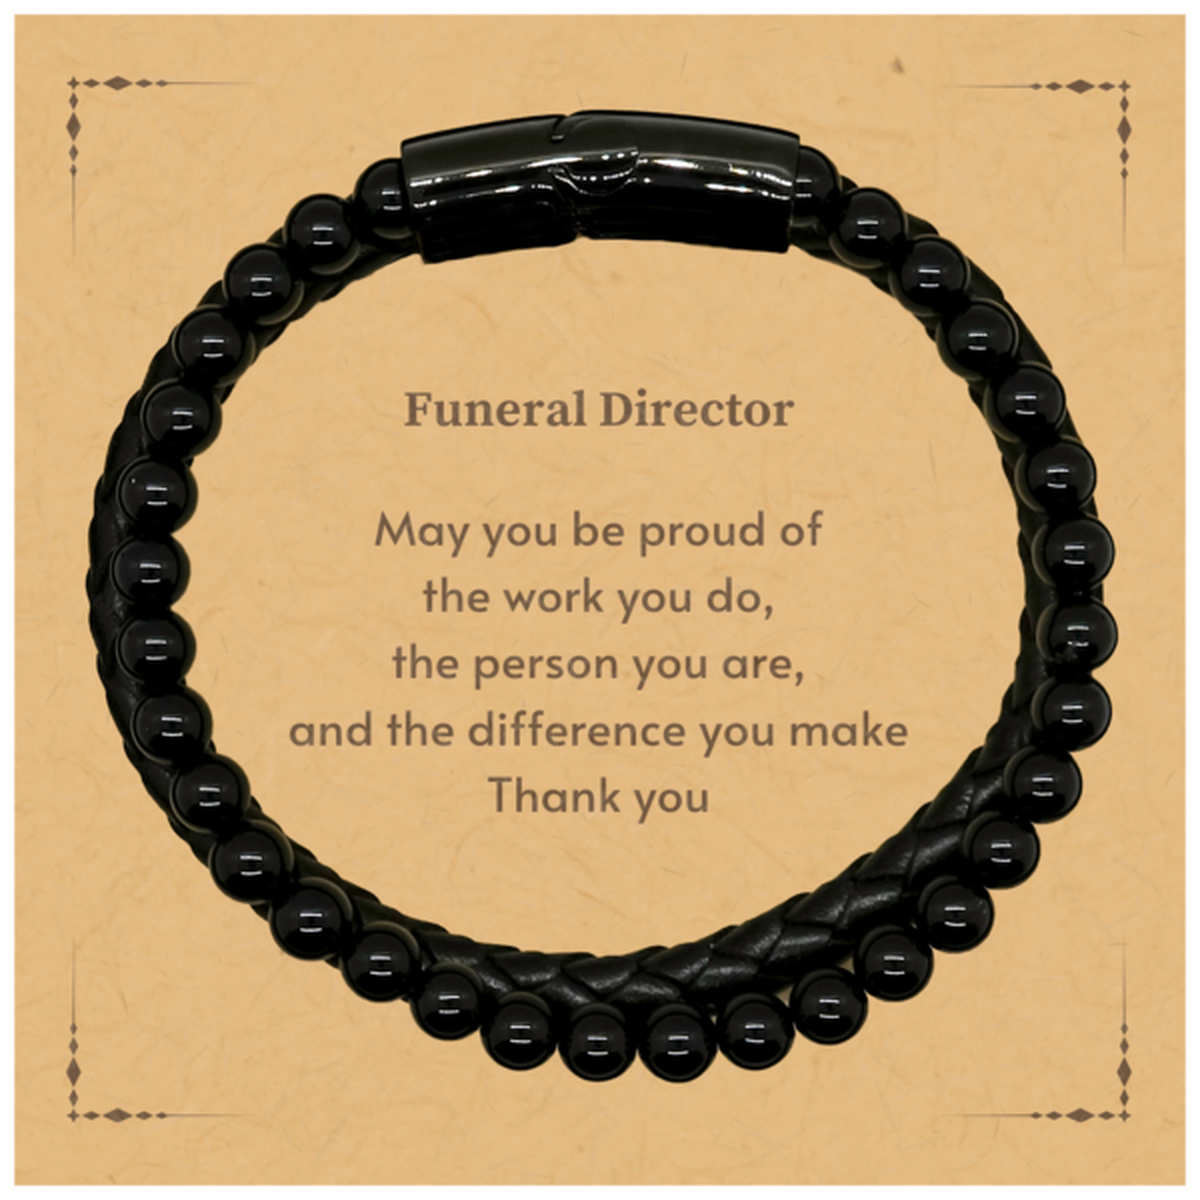 Heartwarming Stone Leather Bracelets Retirement Coworkers Gifts for Funeral Director, Funeral Director May You be proud of the work you do, the person you are Gifts for Boss Men Women Friends